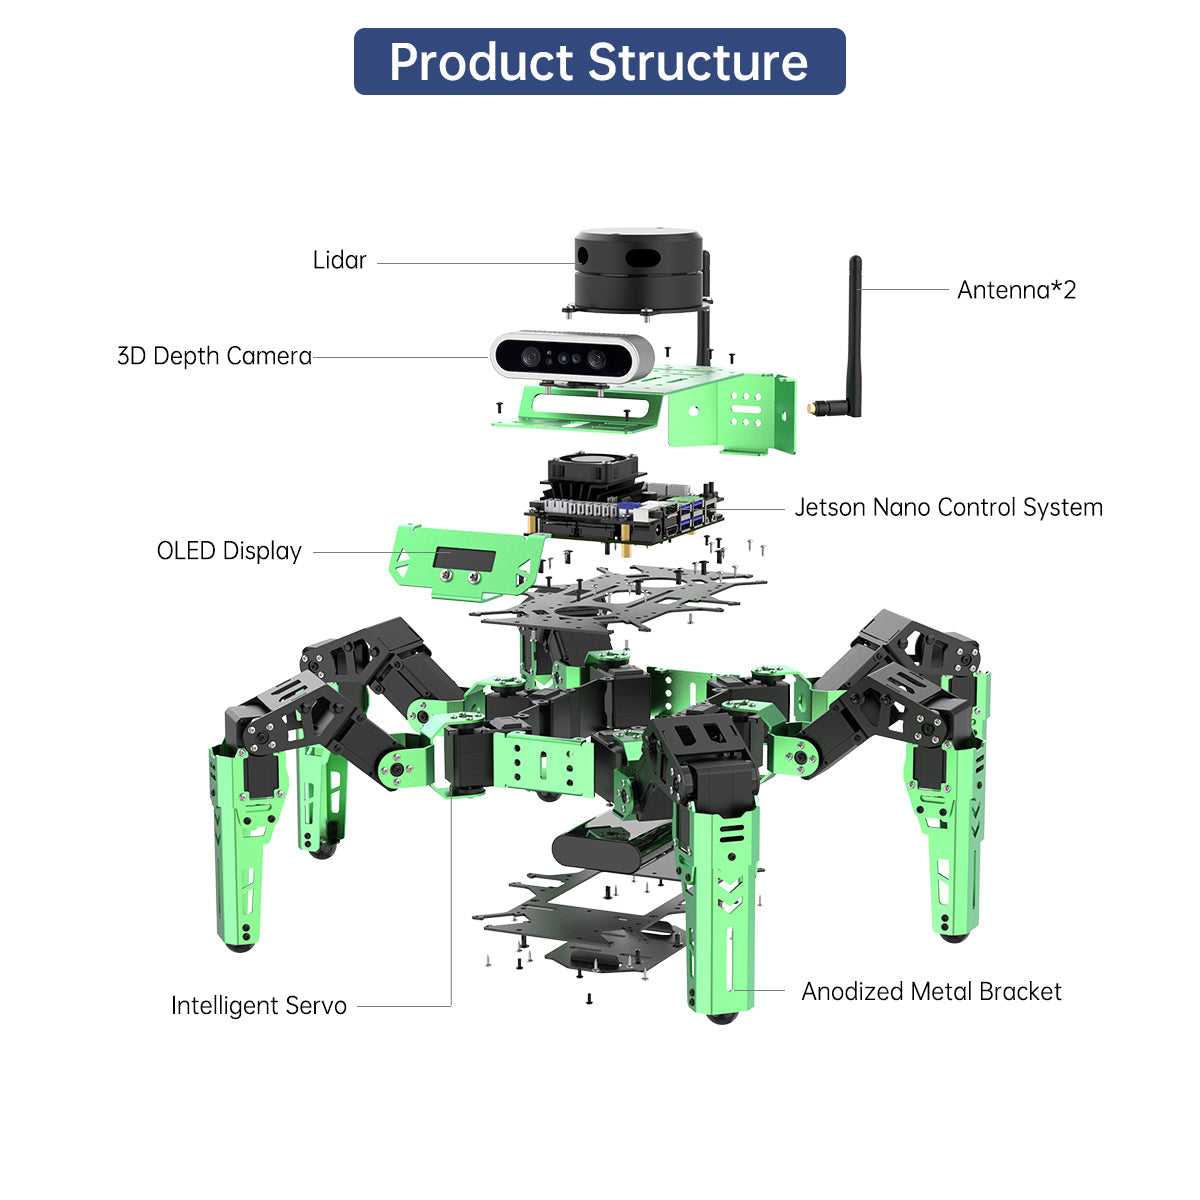 Hiwonder JetHexa ROS Hexapod Robot Kit Powered by Jetson Nano with Lidar Depth Camera Support SLAM Mapping and Navigation